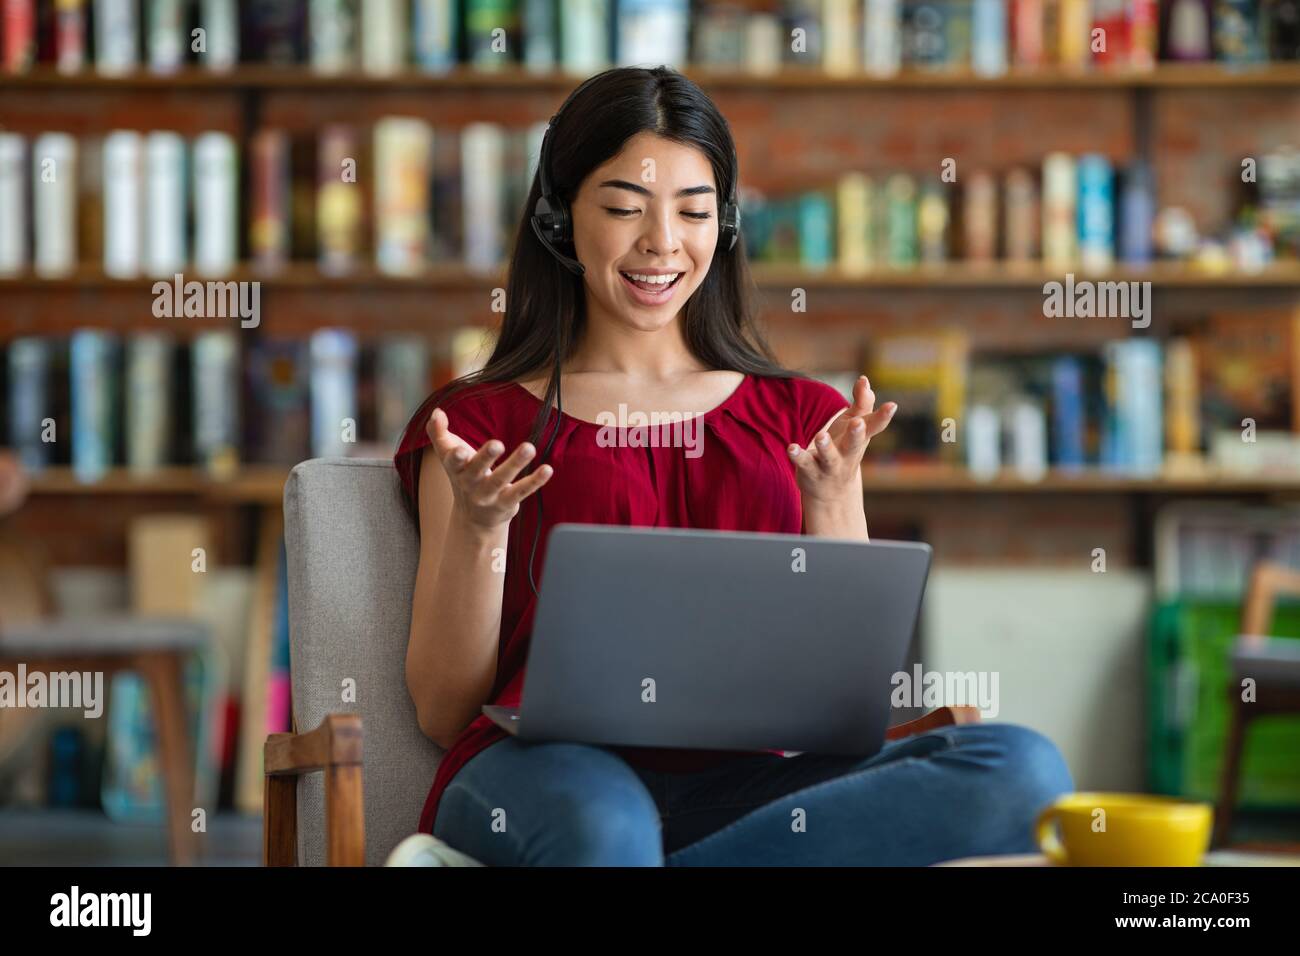 Online Tutoring. Young Asian Female Tutor Teaching Foreign Language Via Video Conference Stock Photo